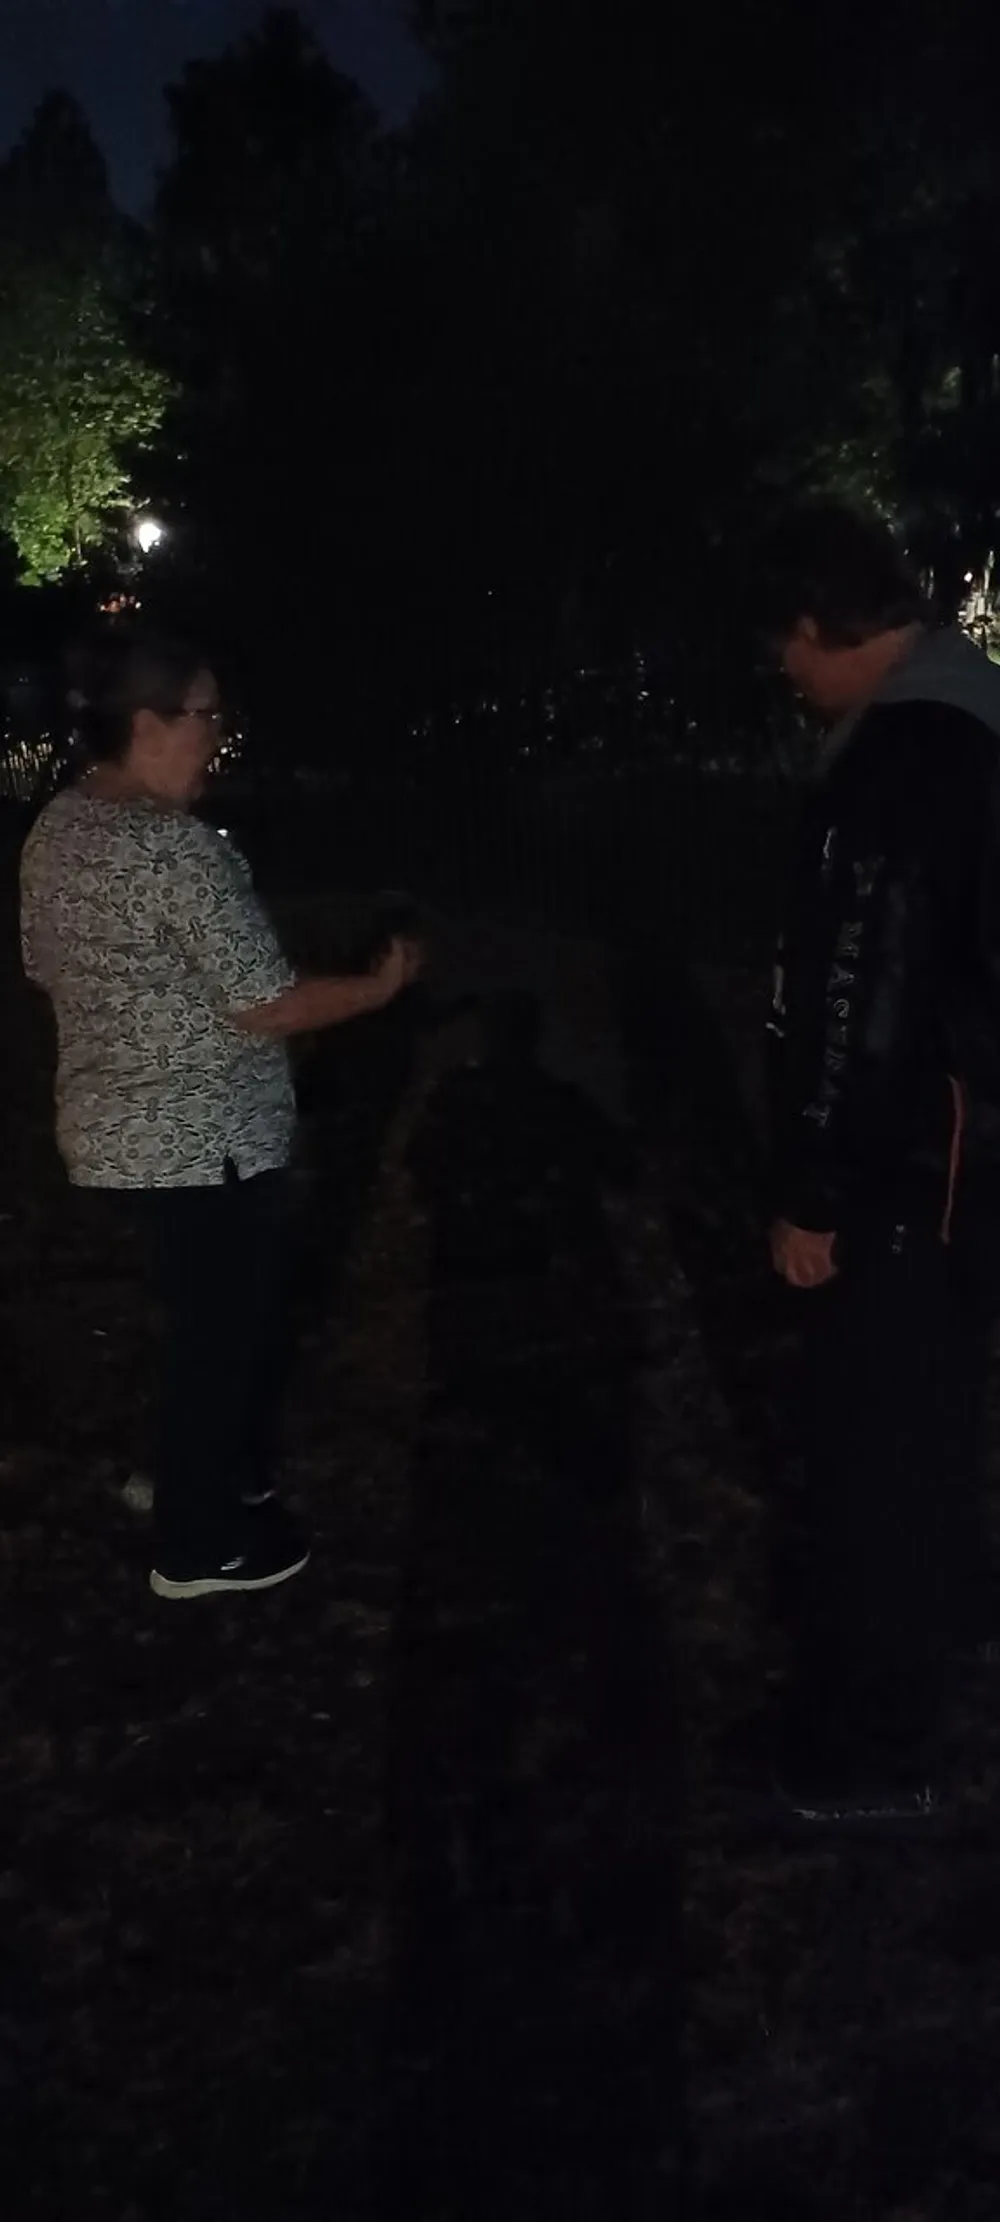 Two people are interacting in a dimly lit outdoor setting at night